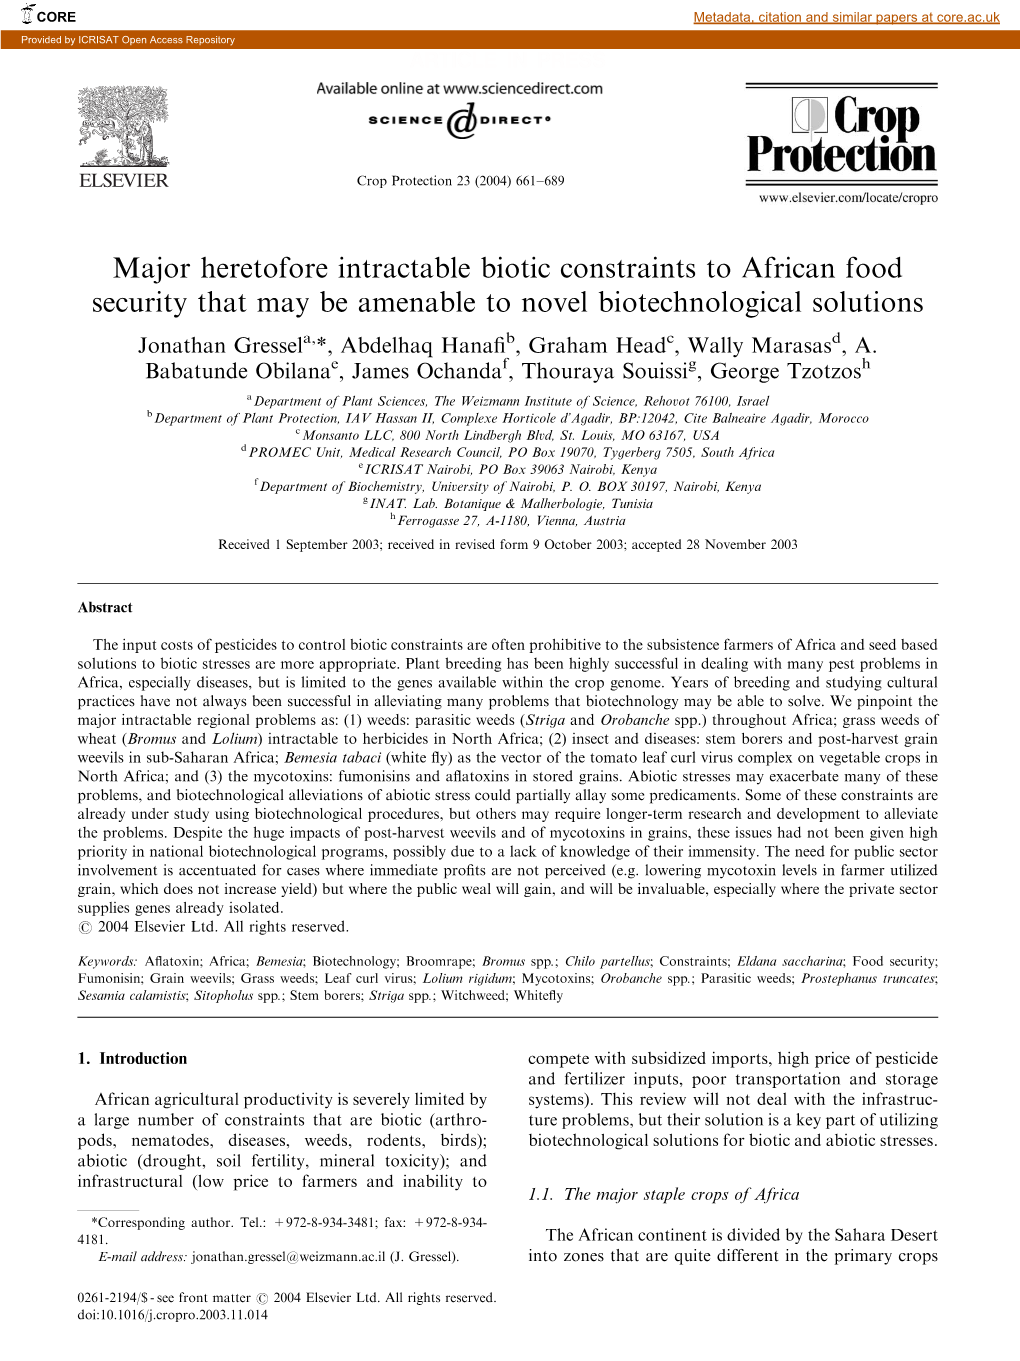 Major Heretofore Intractable Biotic Constraints to African Food Security